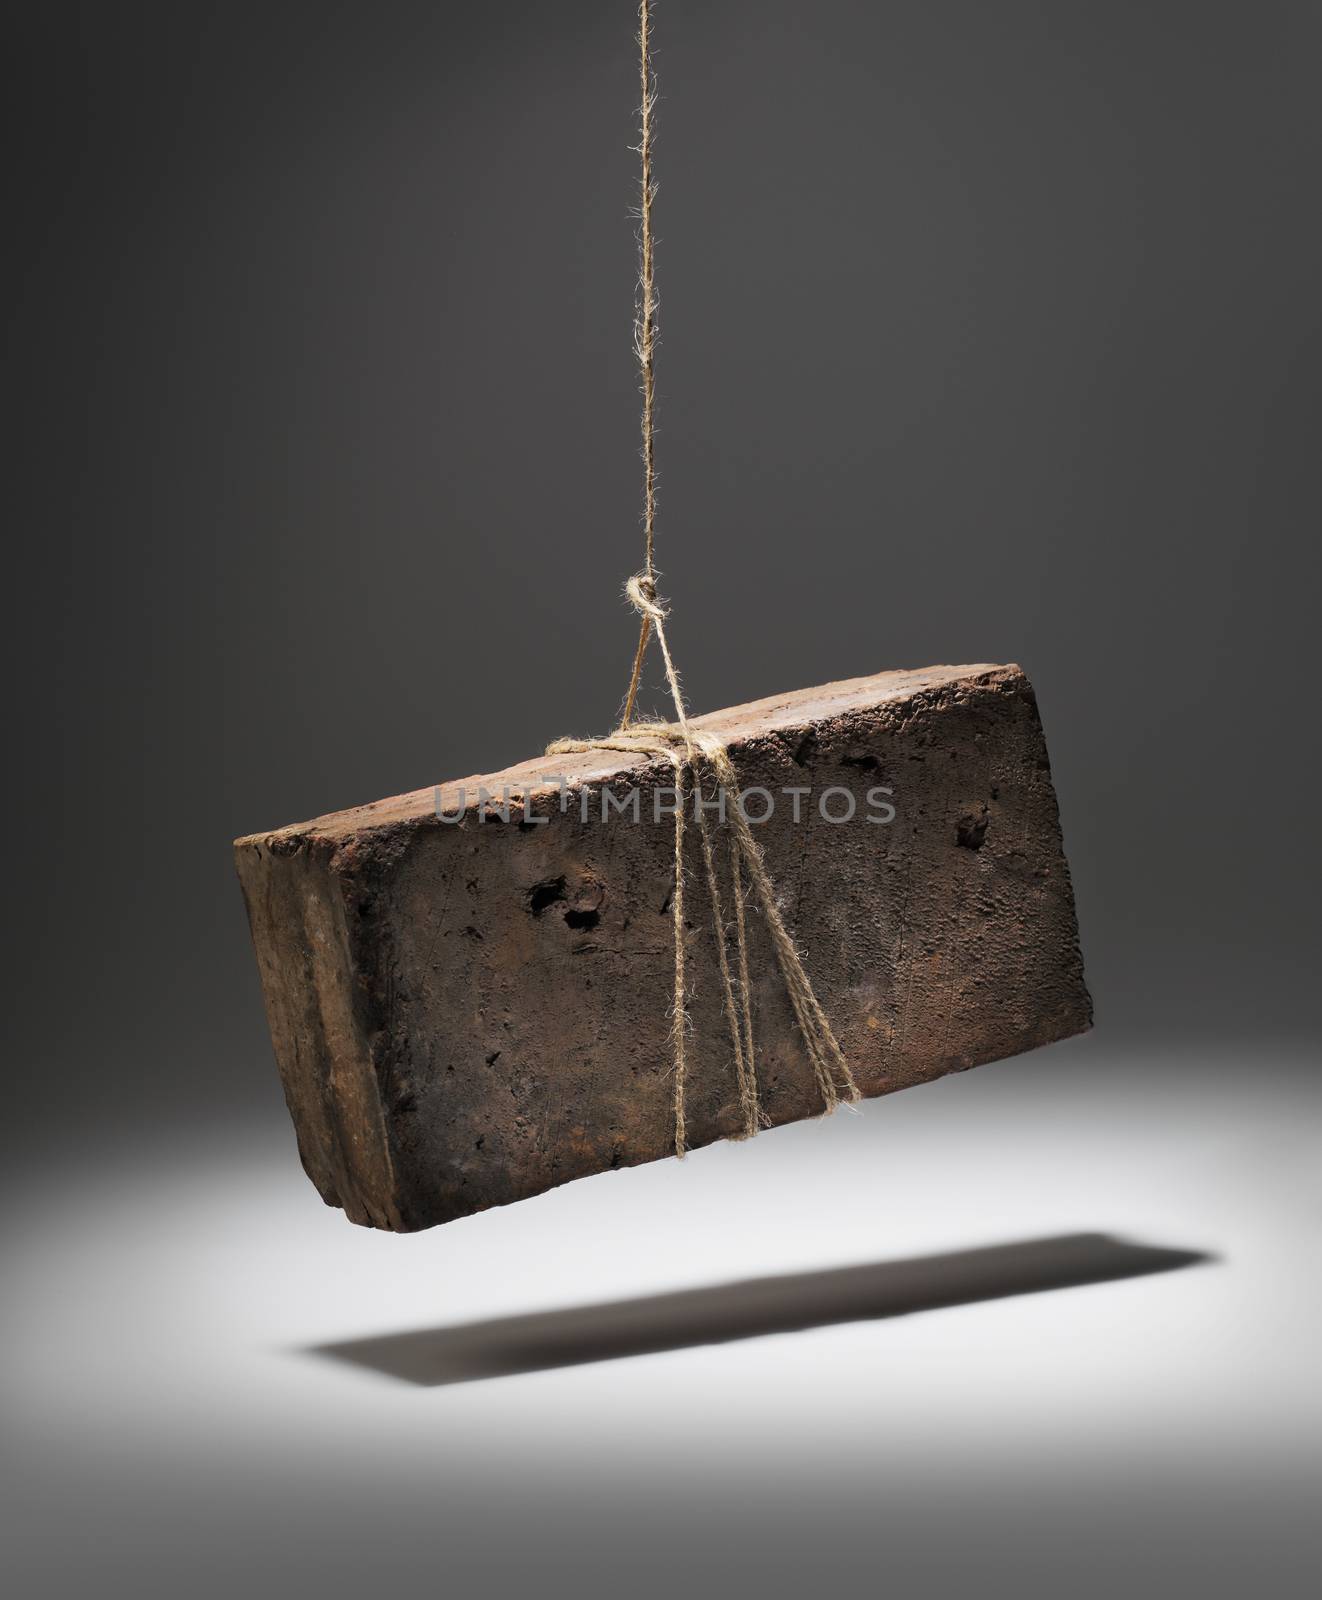 Old worn and weathered brick hanging on a string.